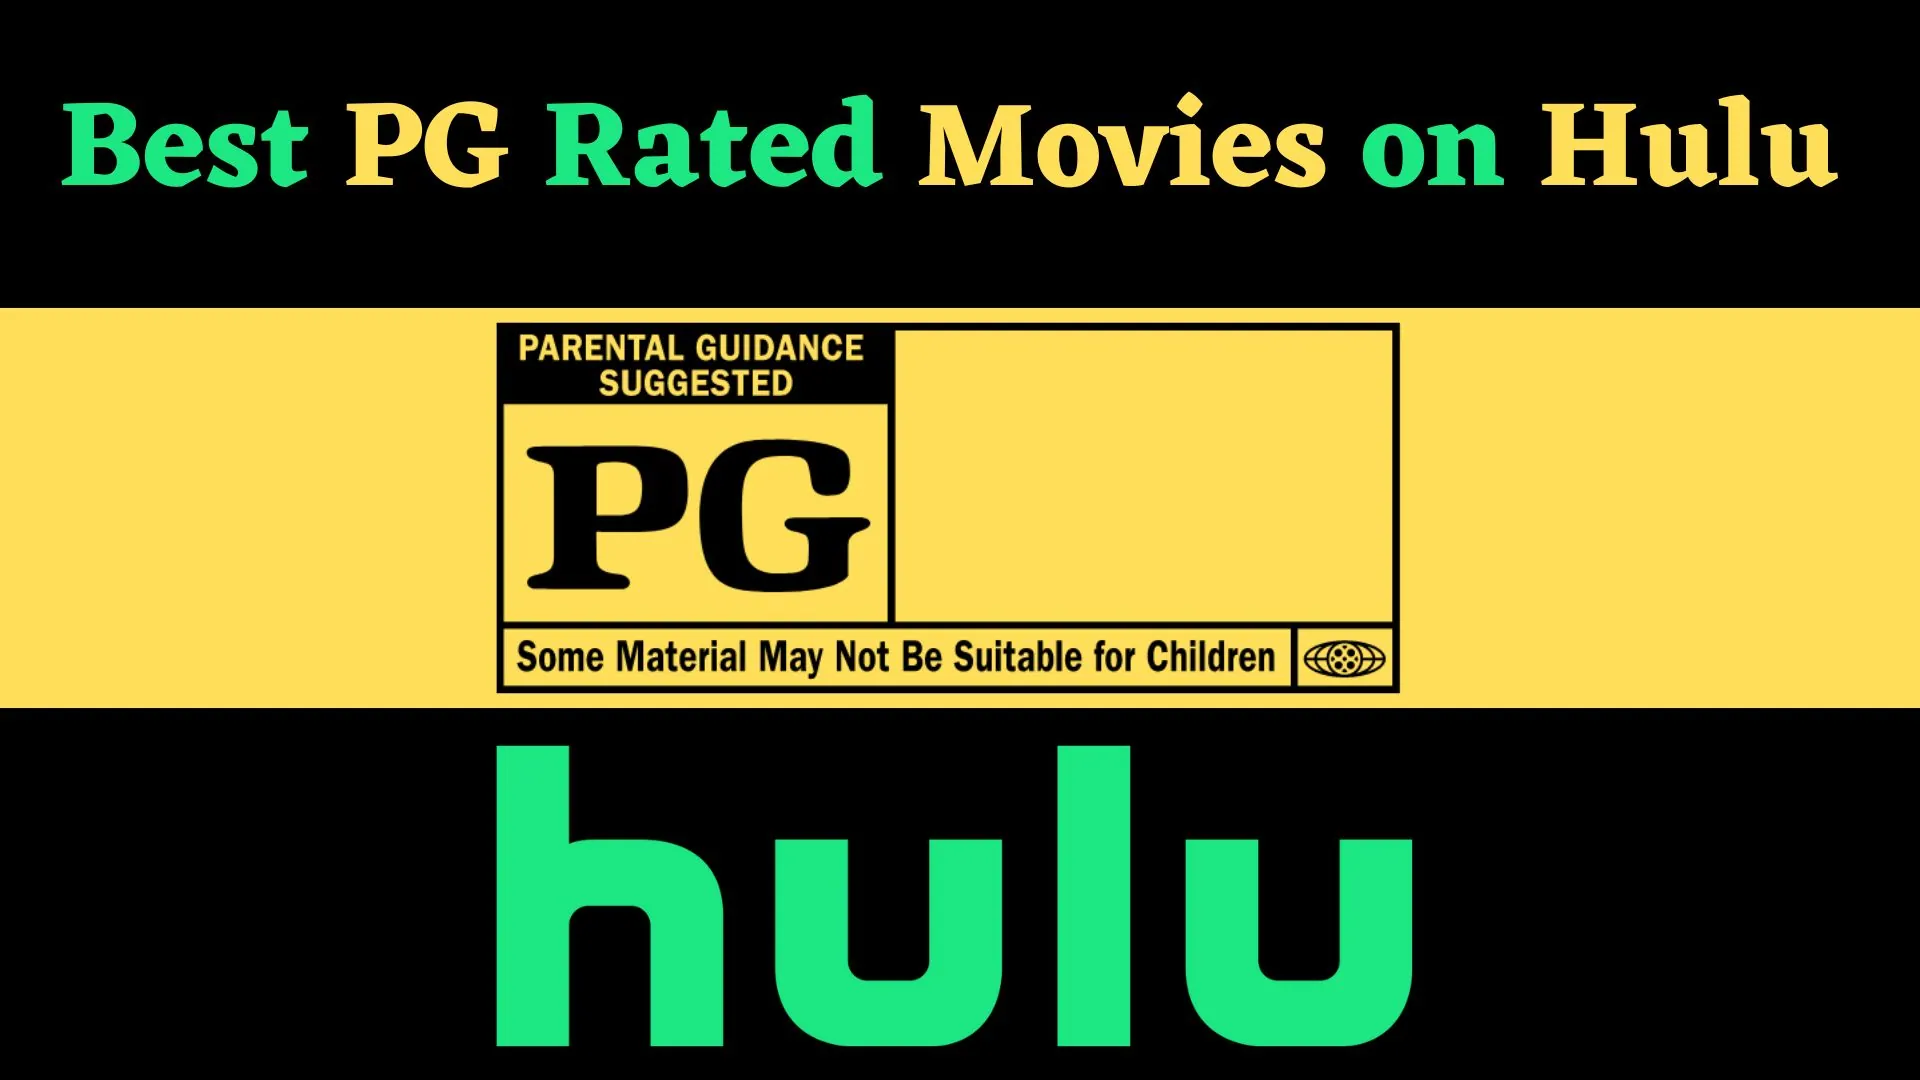 Best PG Rated Movies on Hulu